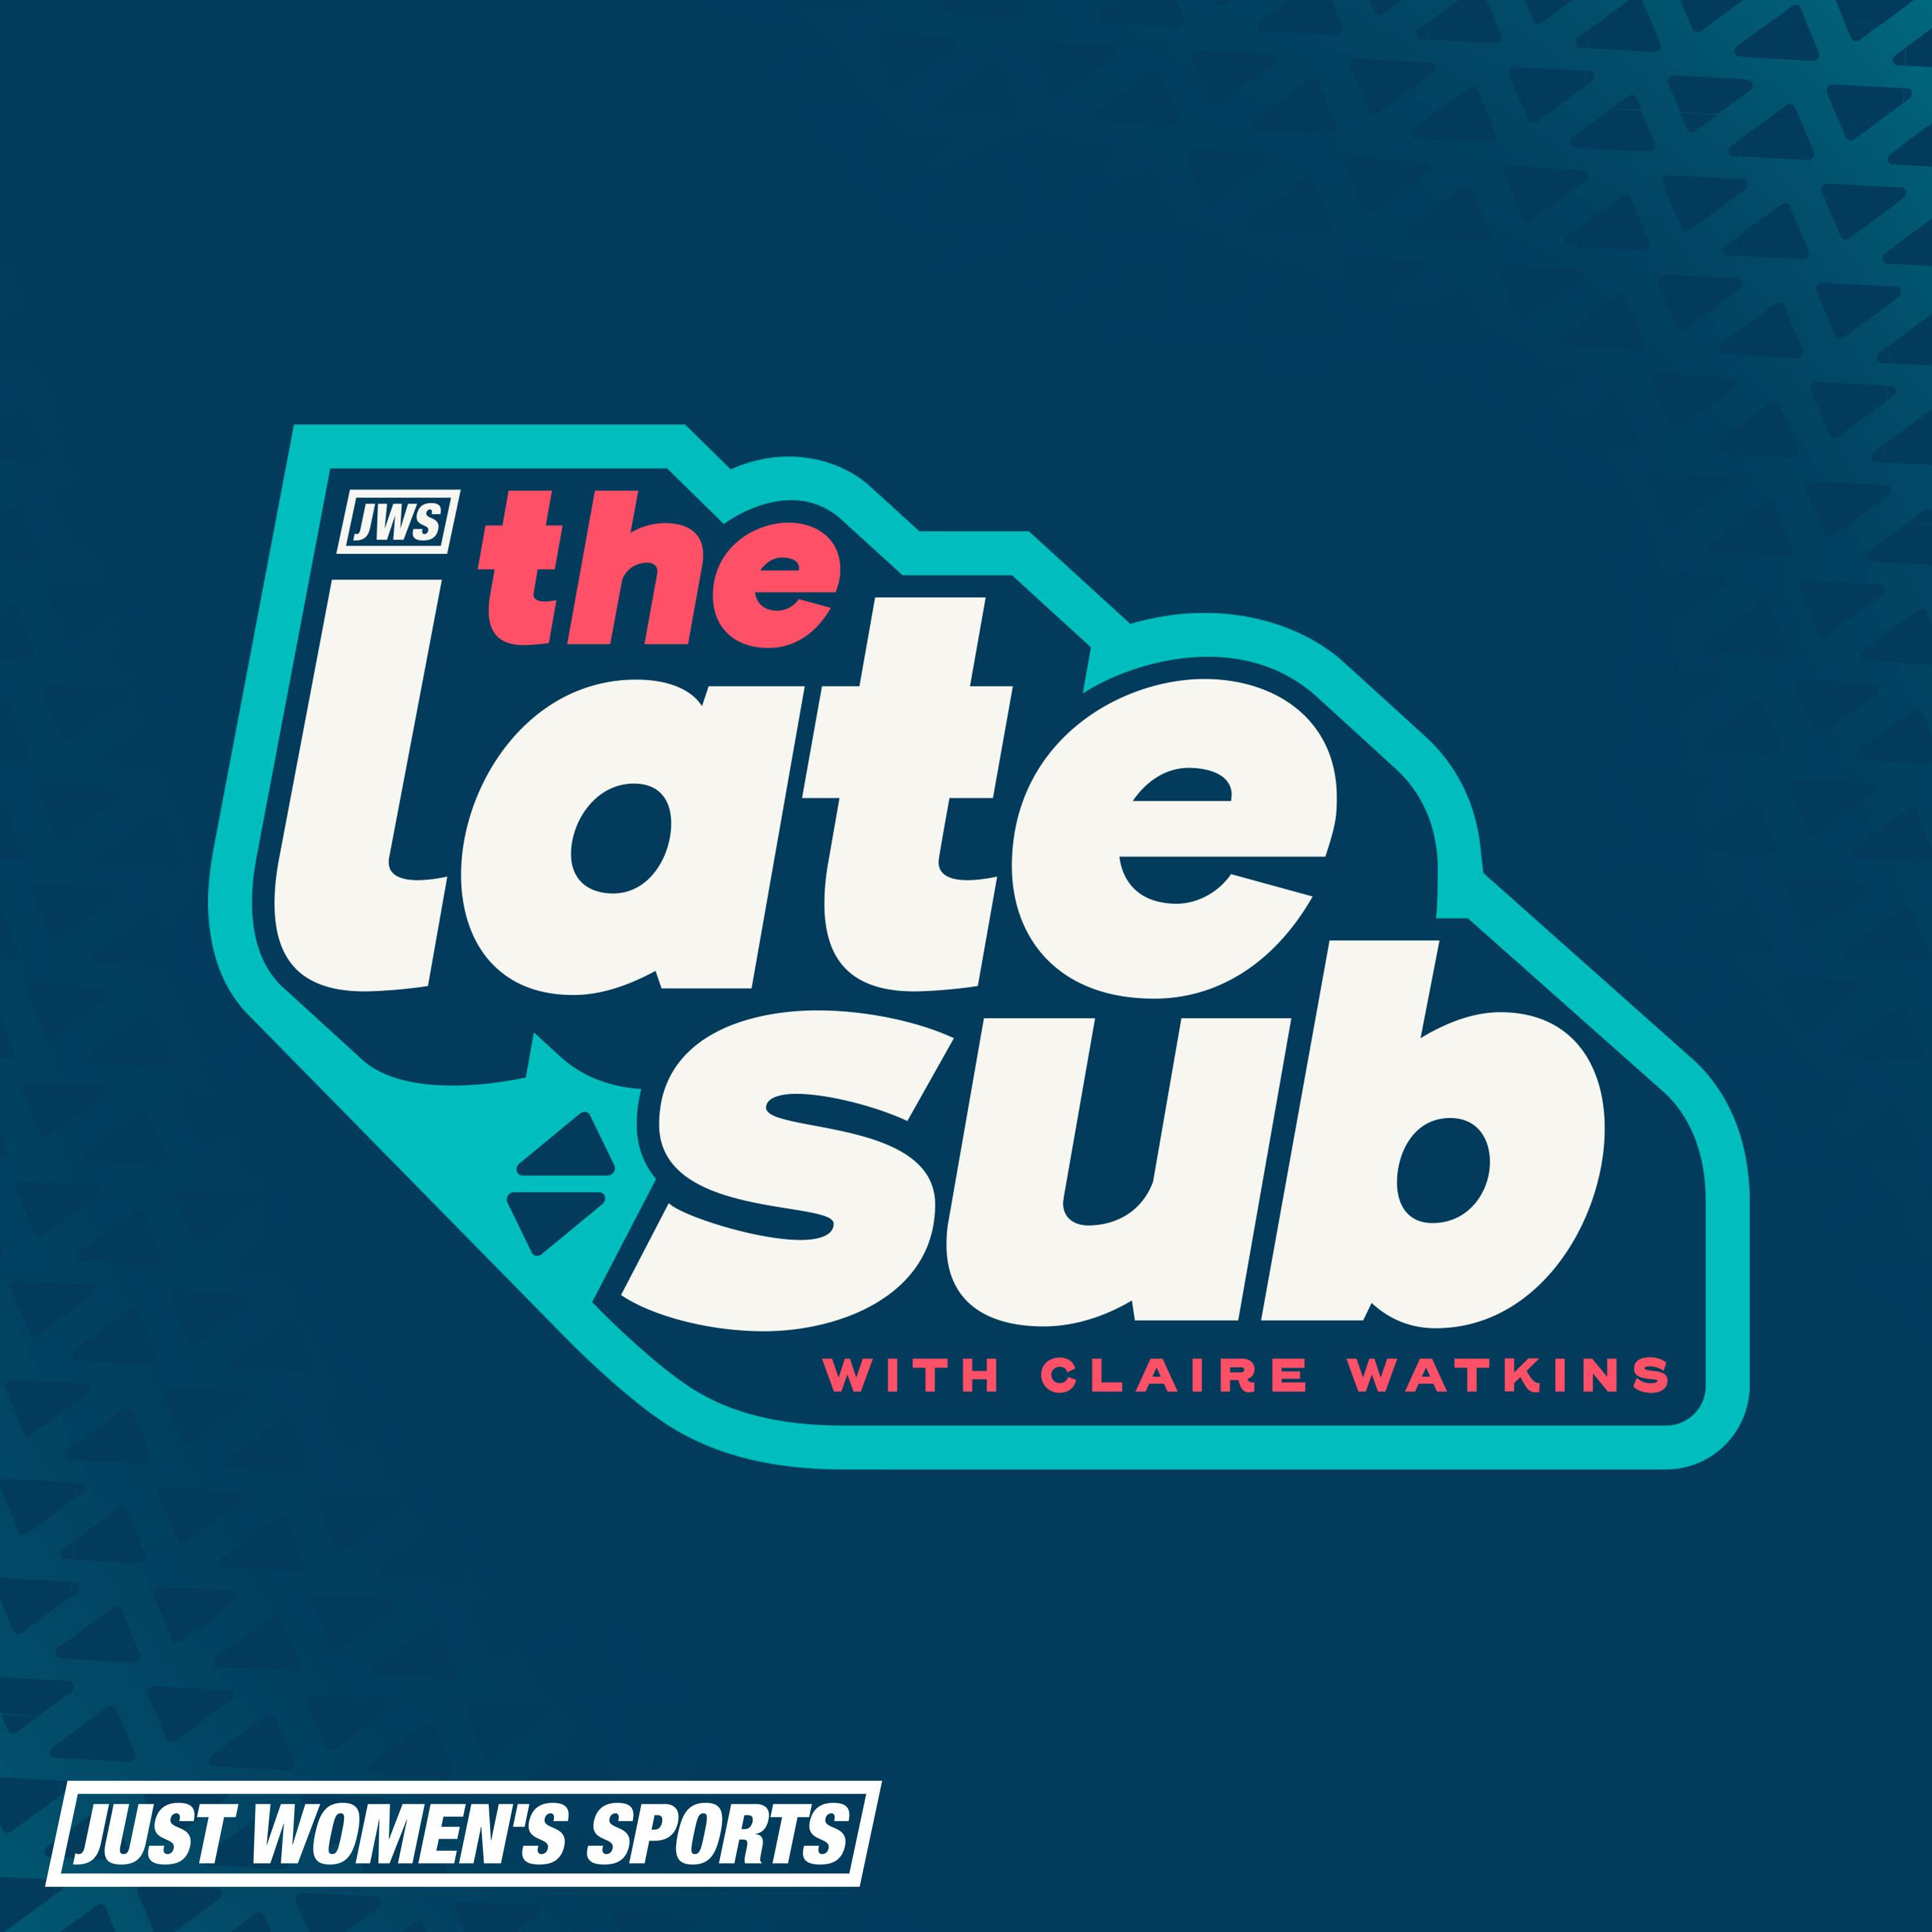 LSU-Iowa recap, Final Four preview, and early-season NWSL takes